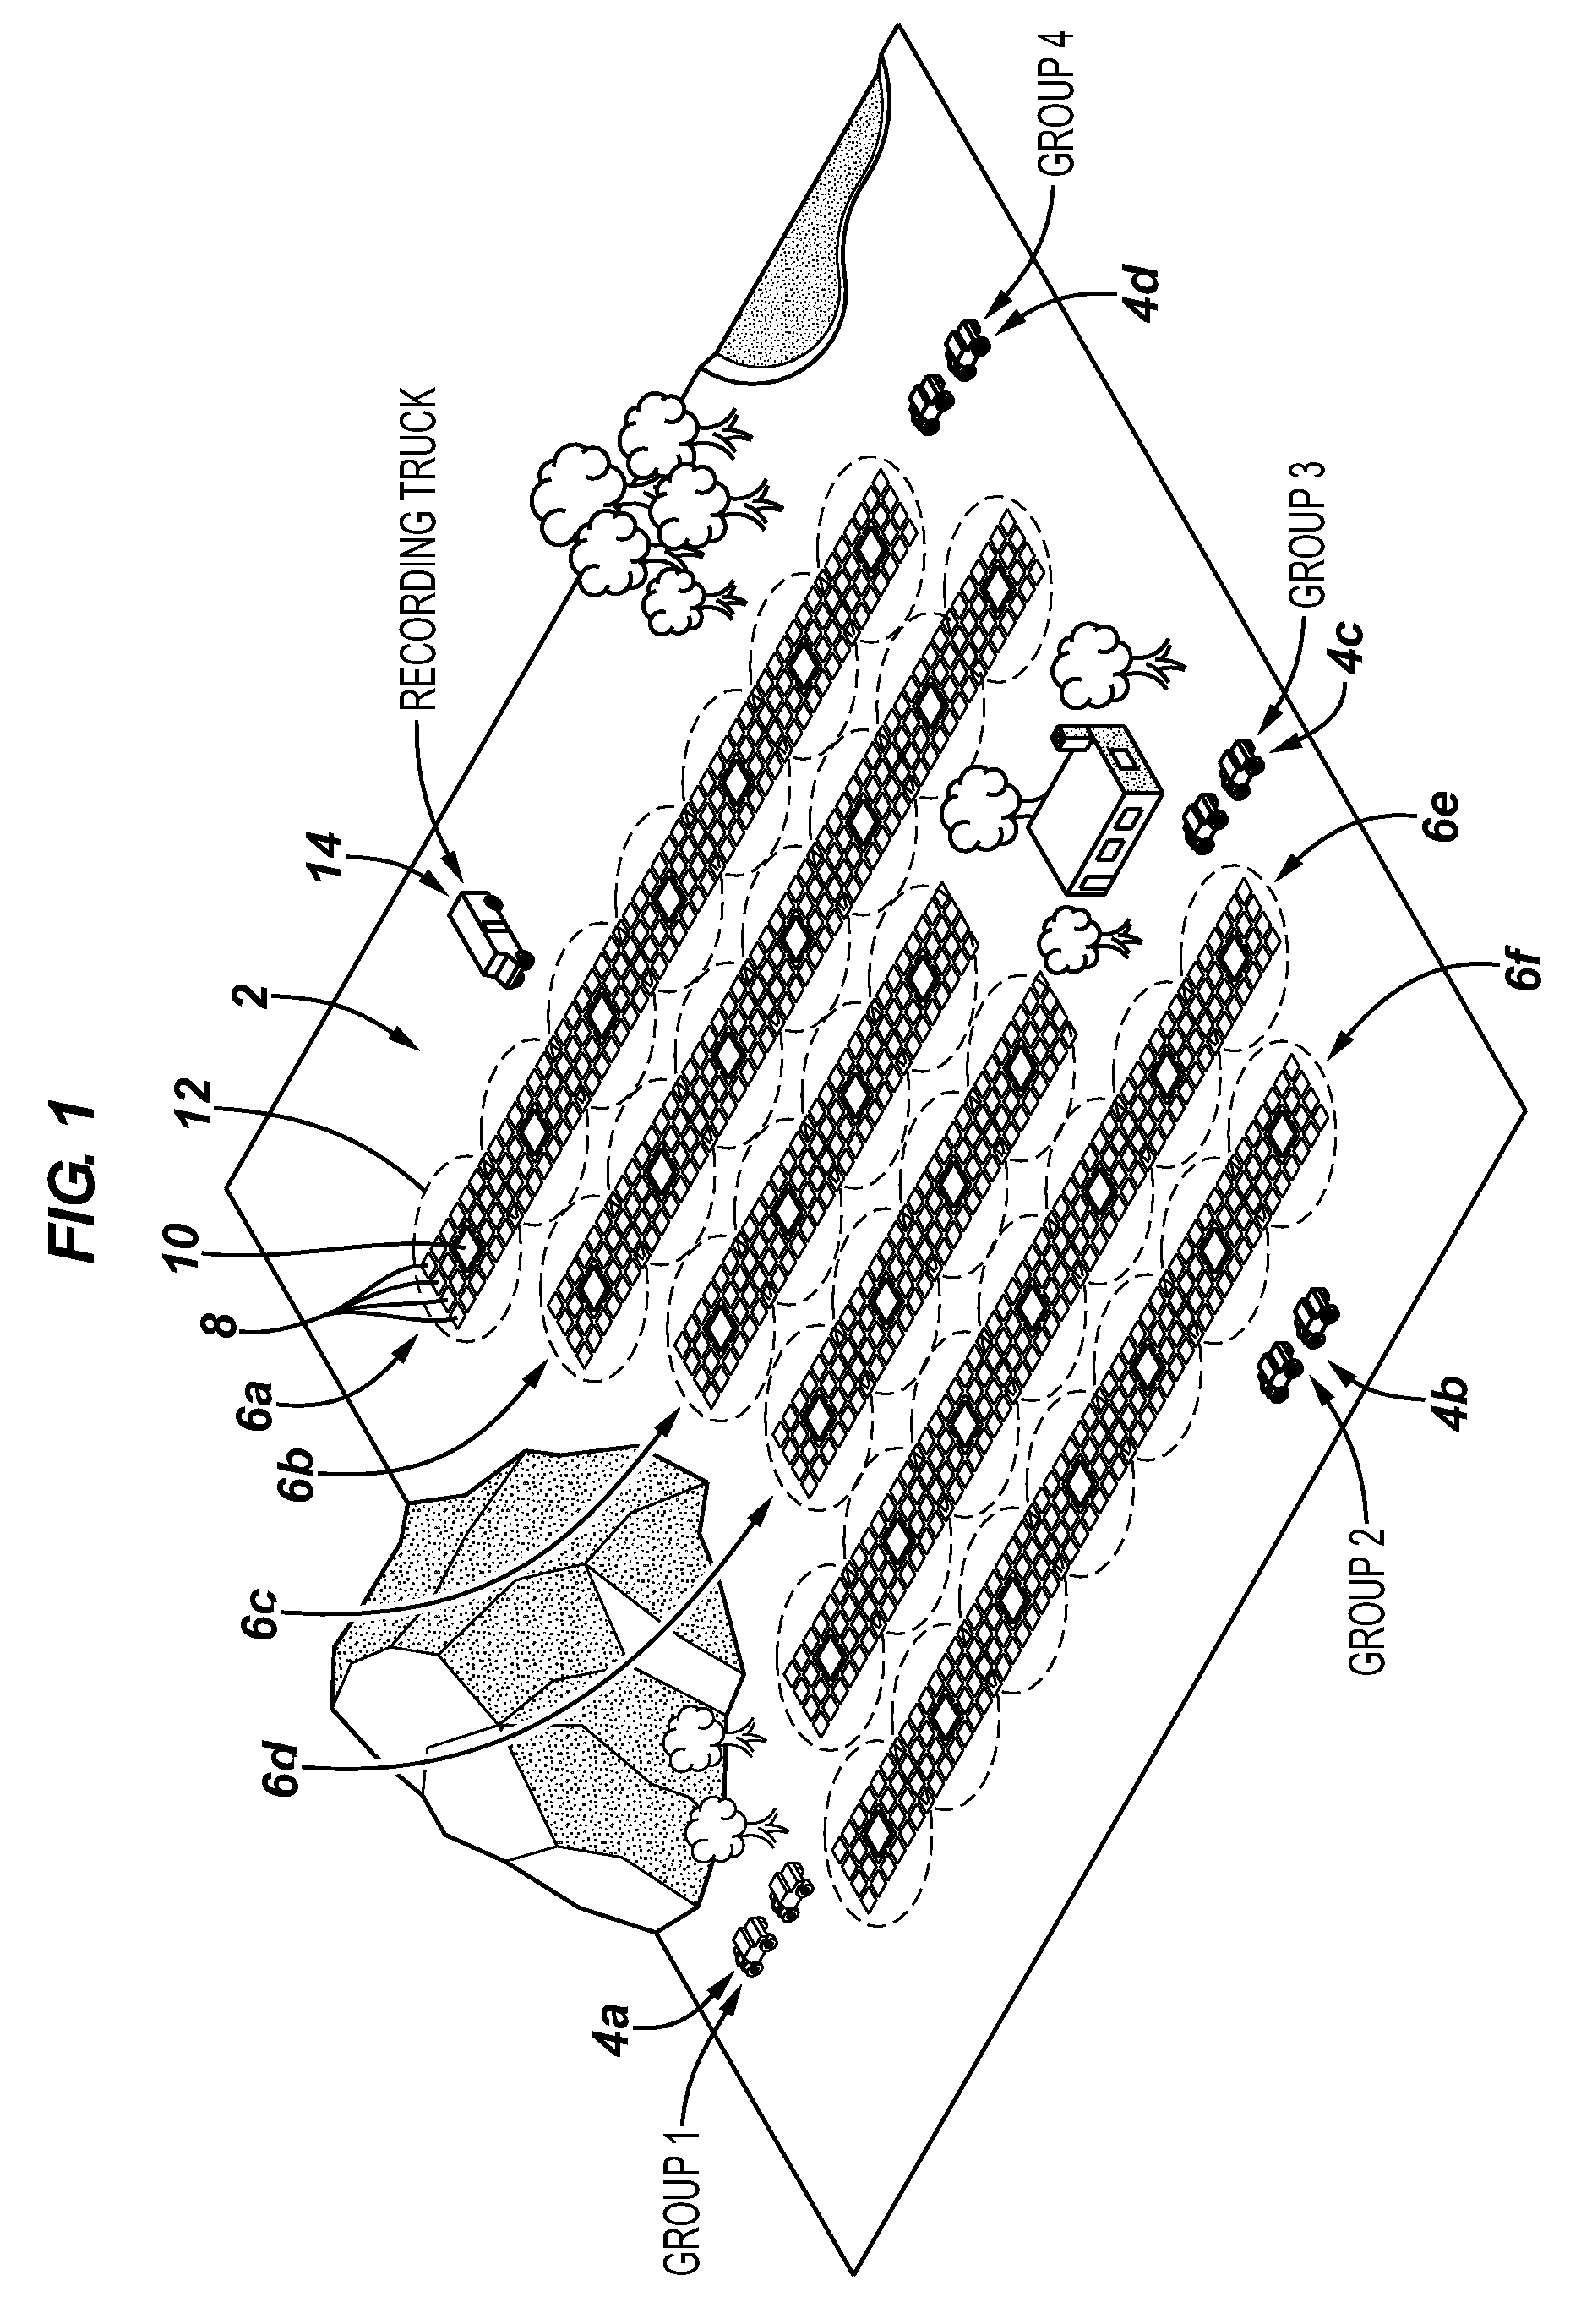 Systems and Methods for Seismic Data Acquisition Employing Asynchronous, Decoupled Data Sampling and Transmission